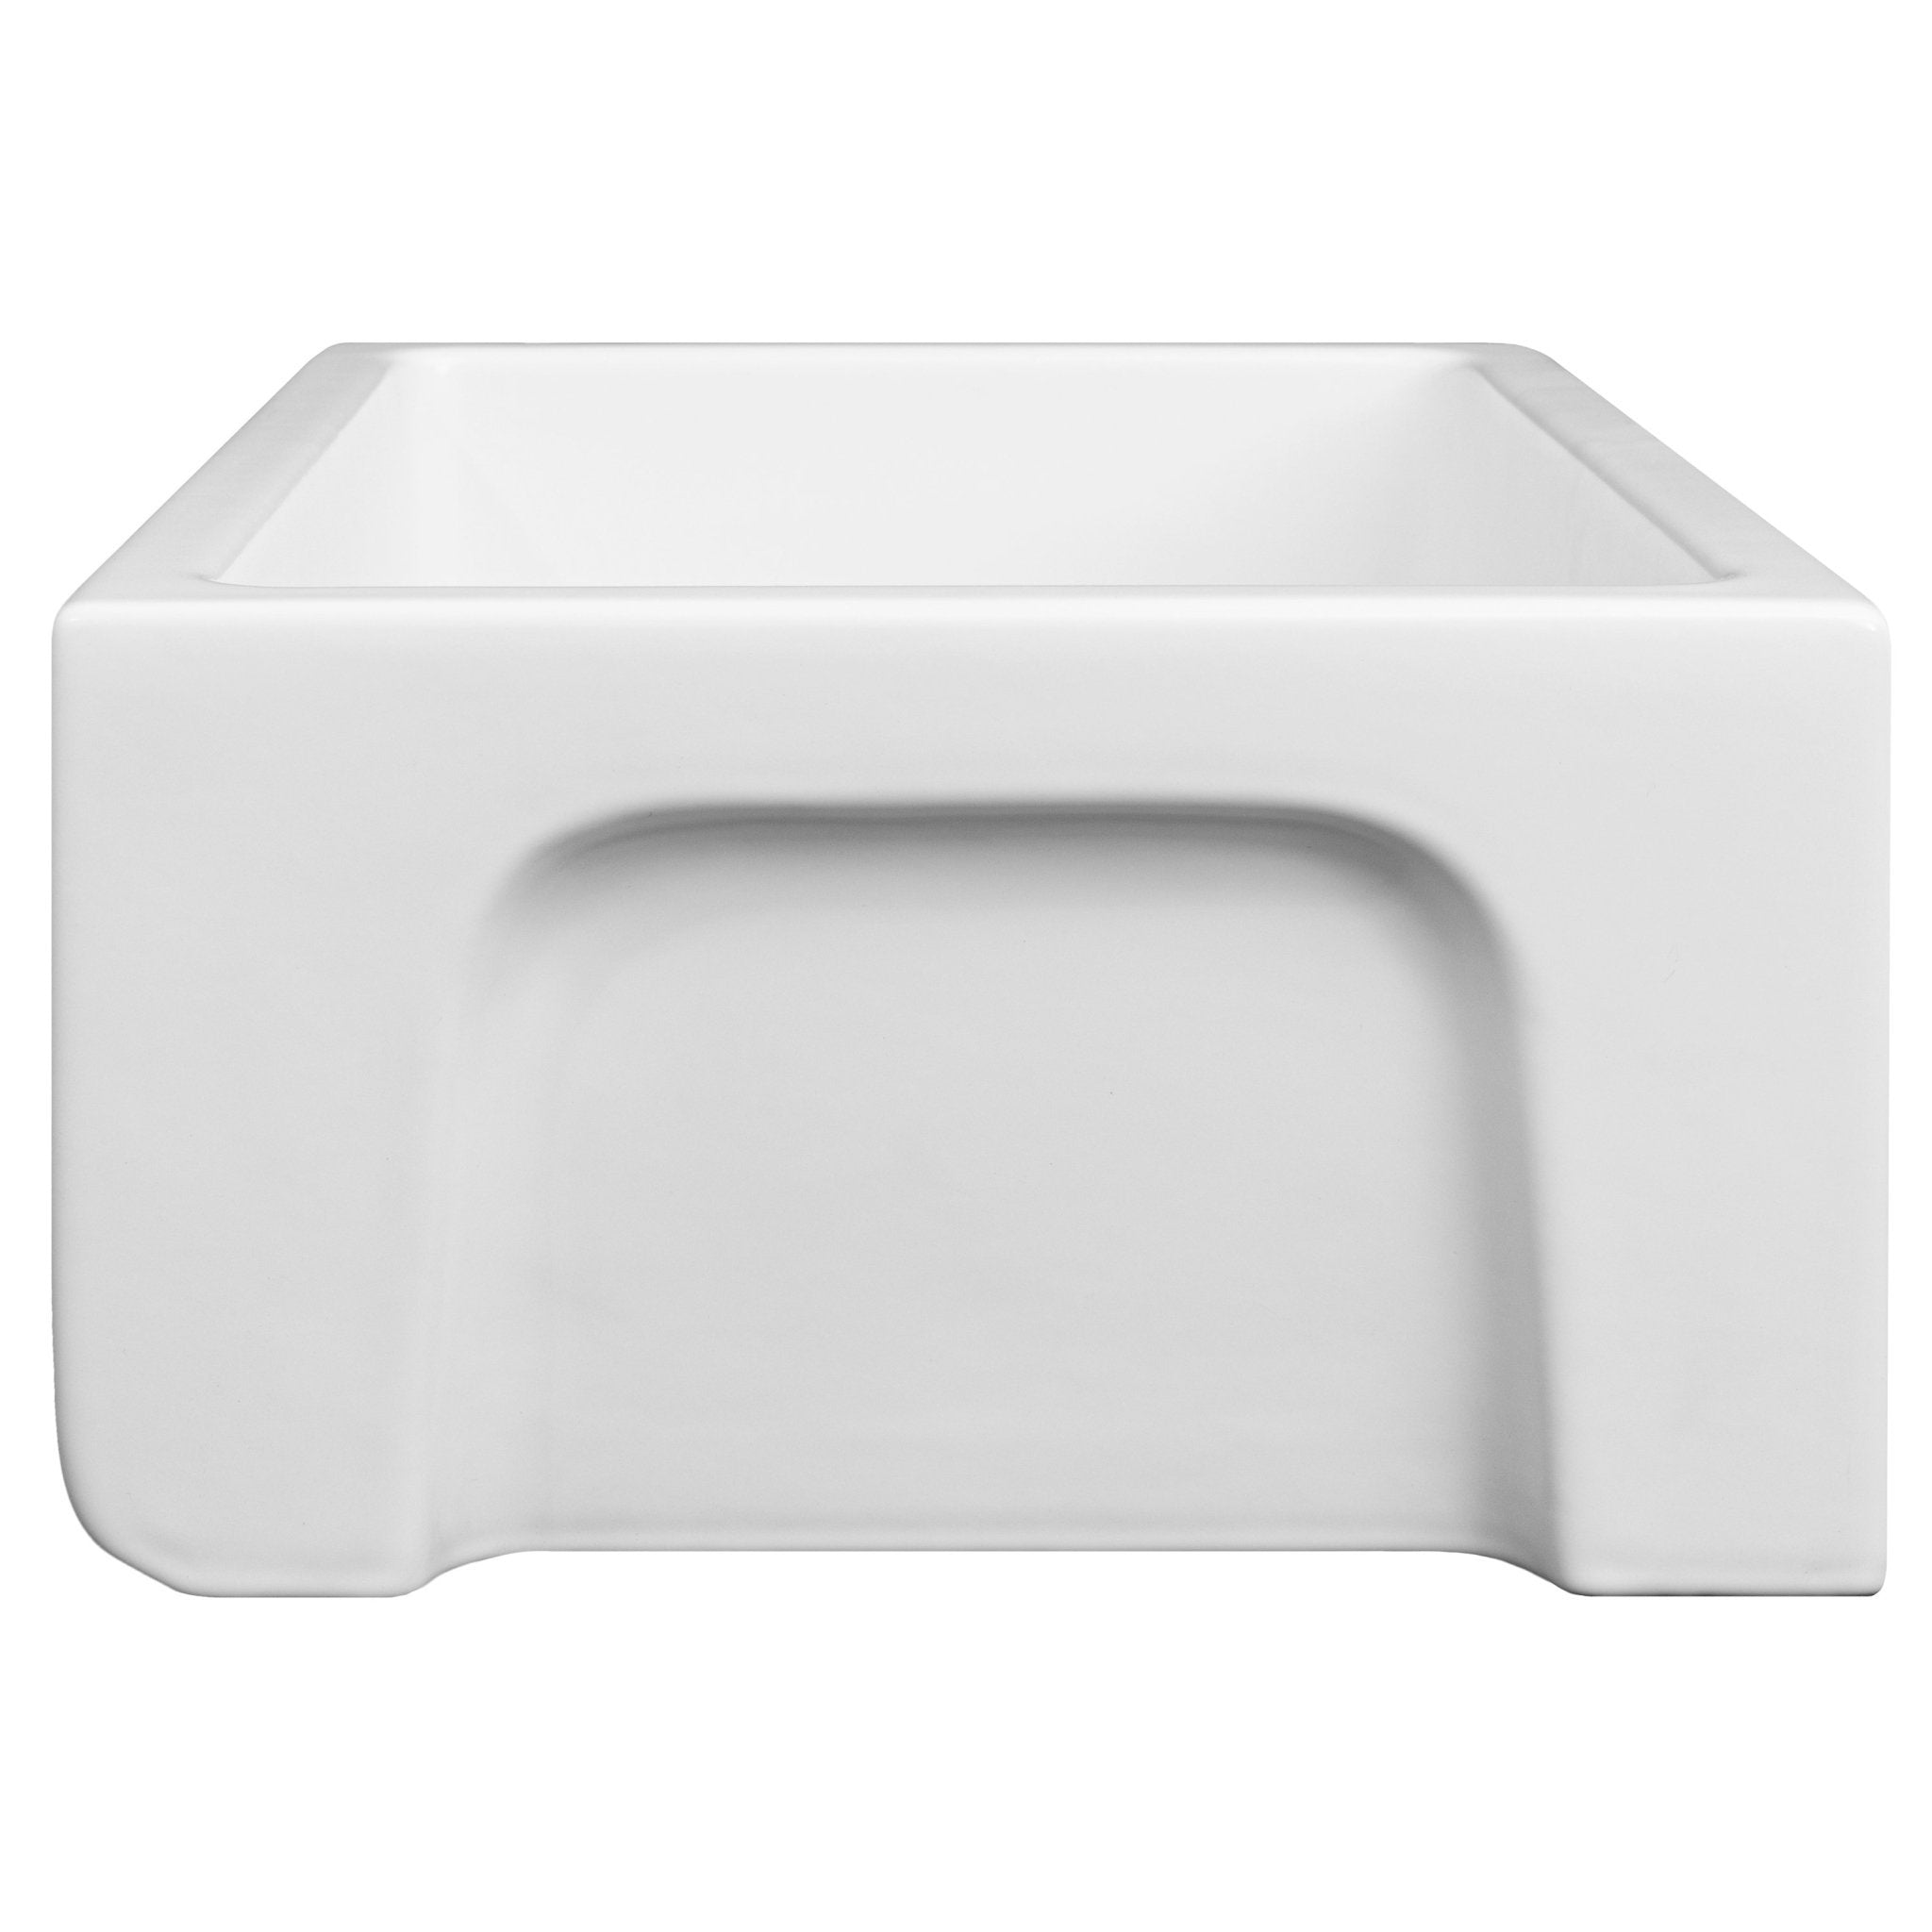 ZLINE 24" Venice Farmhouse Apron Front Reversible Single Bowl Fireclay Kitchen Sink with Bottom Grid in White Gloss (FRC5120-WH-24)